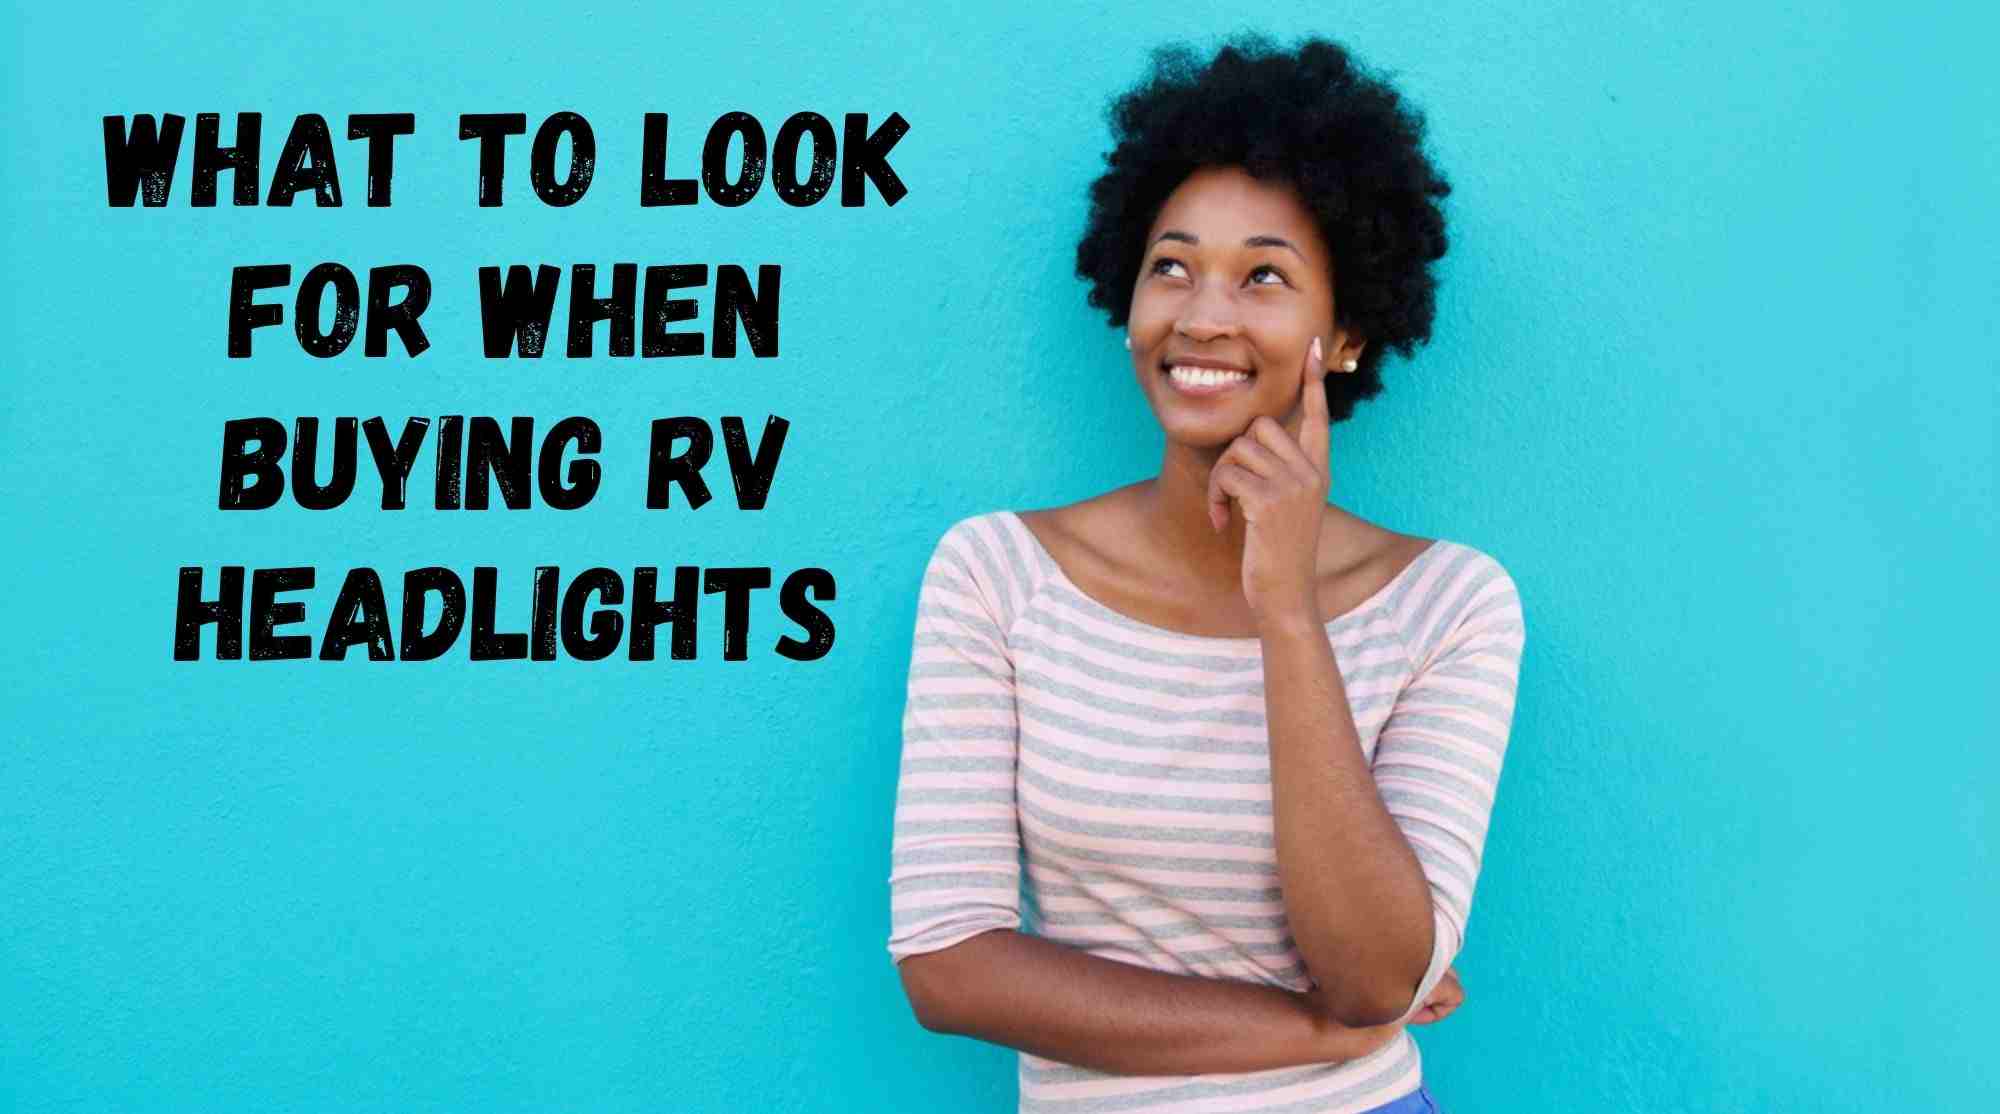 What to Look For When Buying RV Headlights